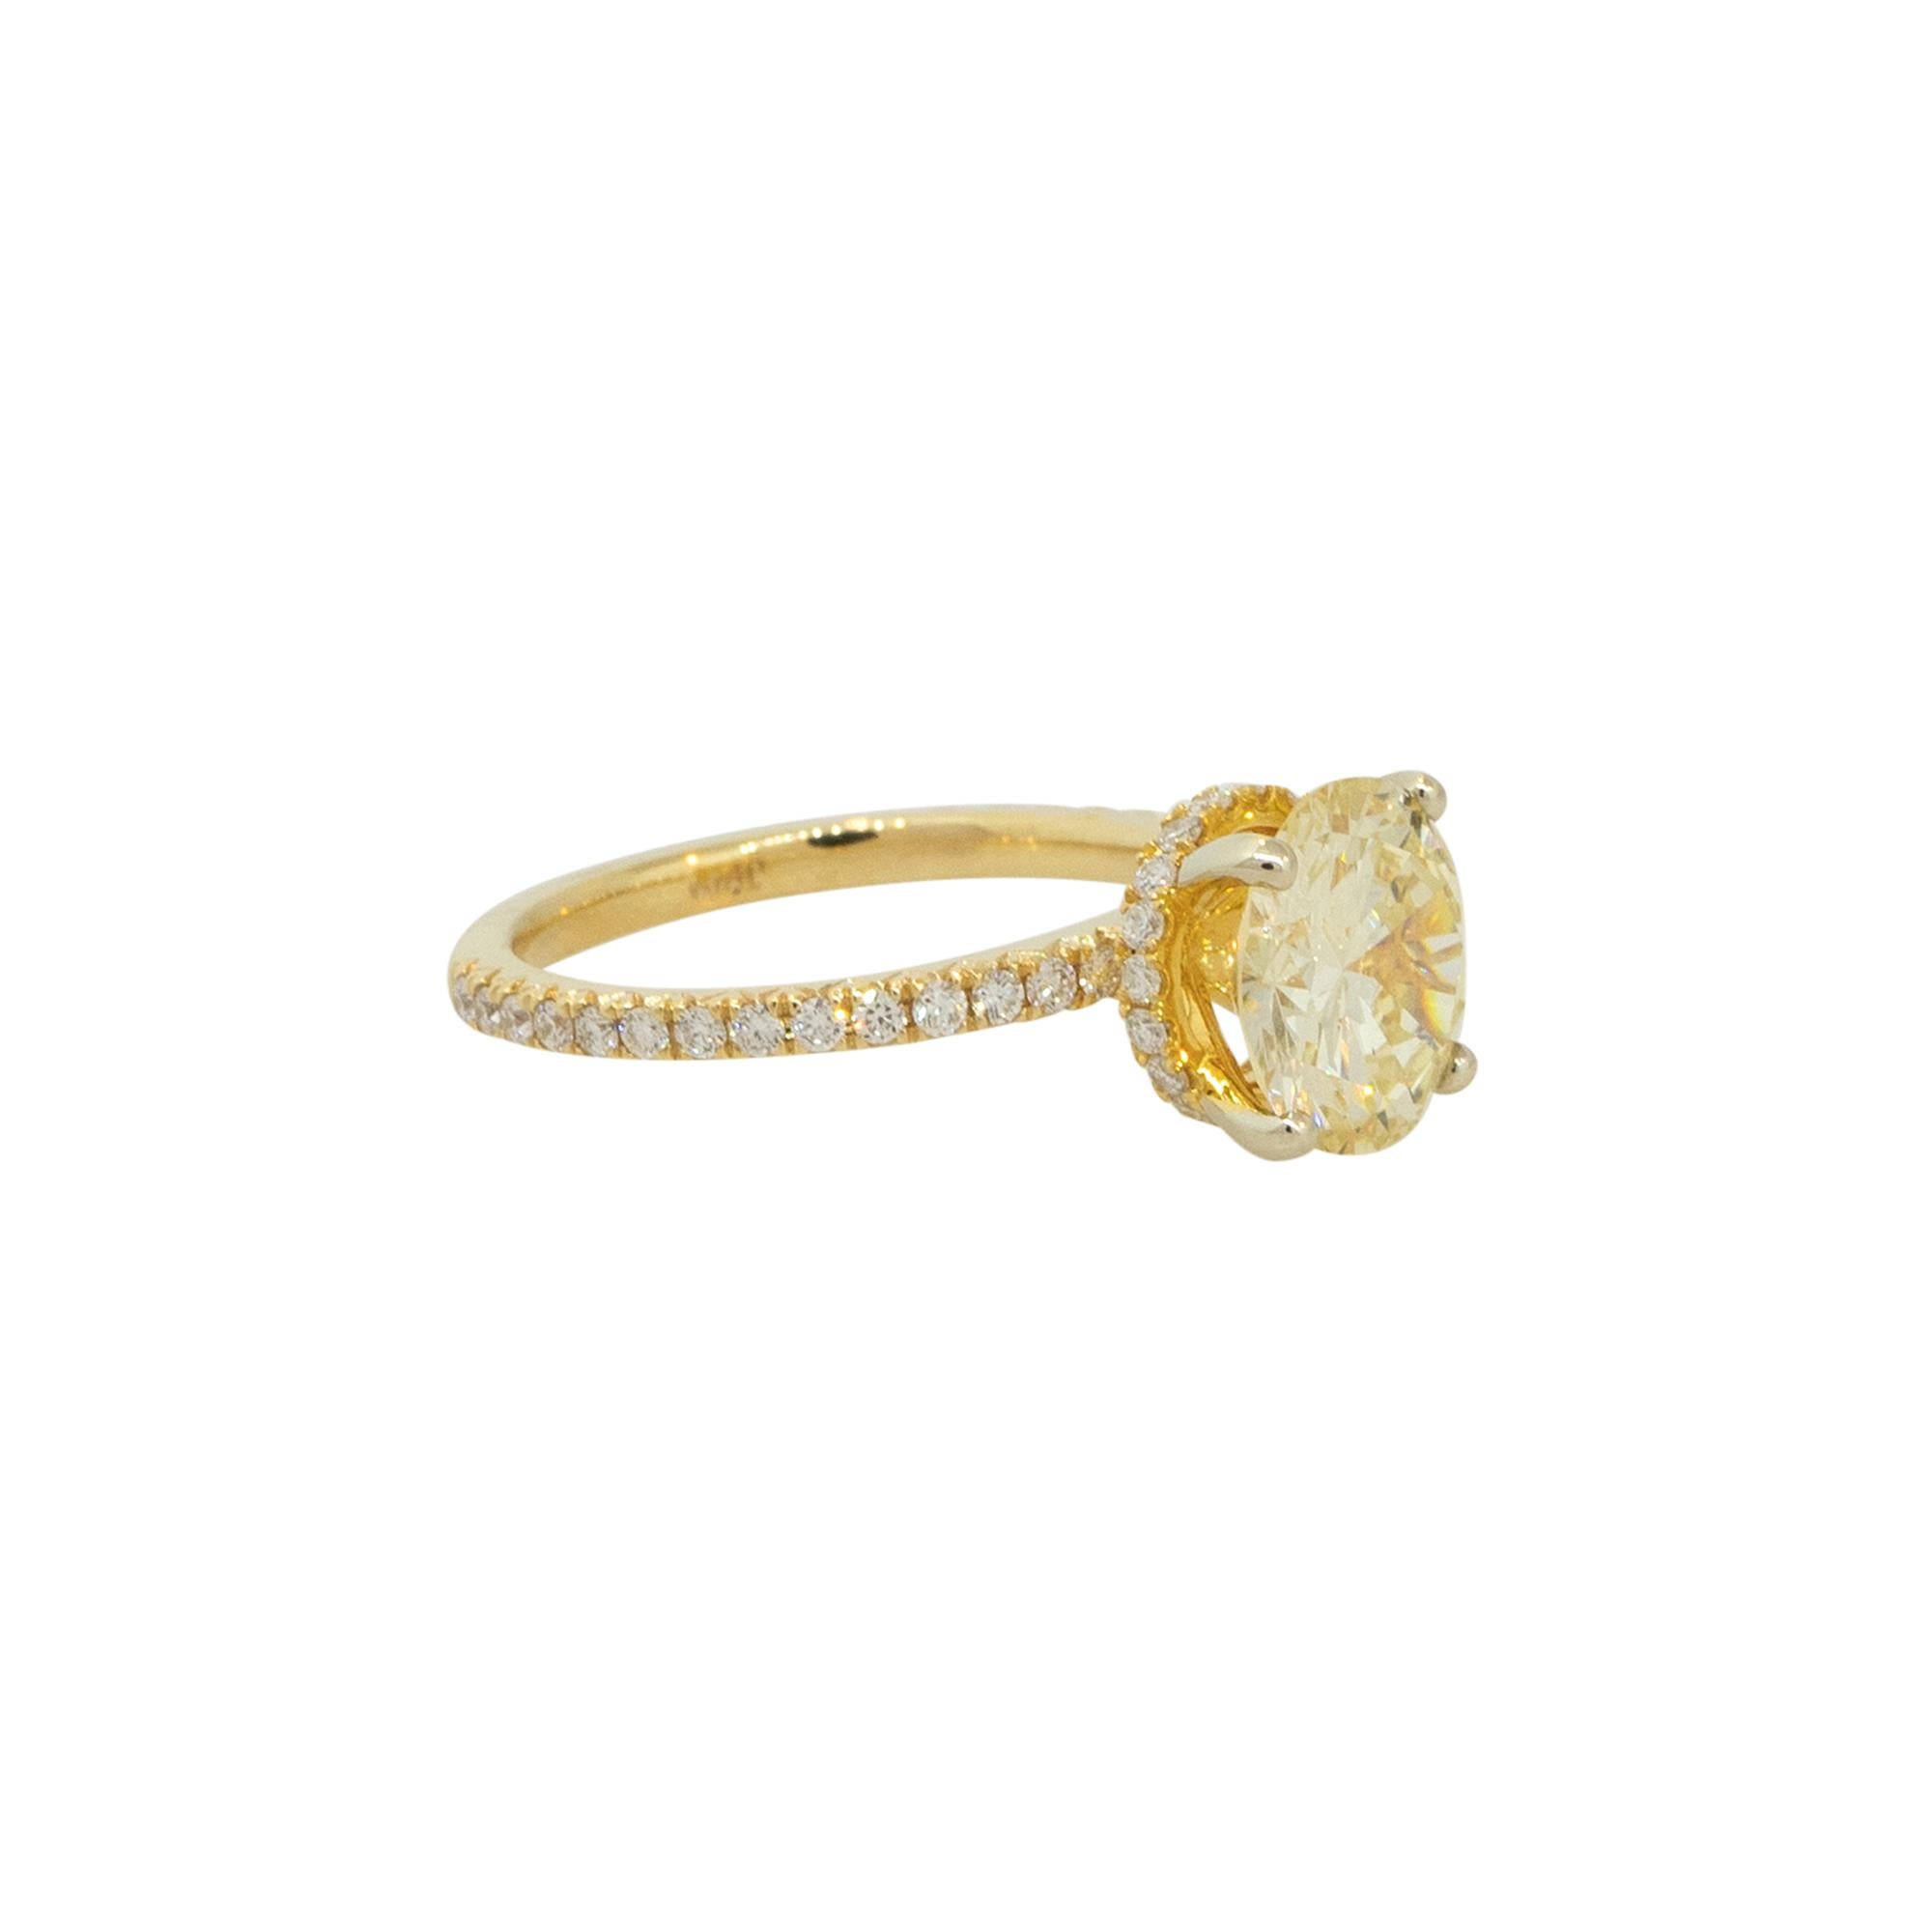 18k Yellow Gold 3.29ctw Round Brilliant Diamond Engagement Ring

Material: 18k Yellow Gold
Center Diamond Details: Approx. 2.79ct Round Brilliant Diamond. Diamond is M in color and VS1 in clarity
Diamond Details: Approx. 0.50ctw of Round Cut